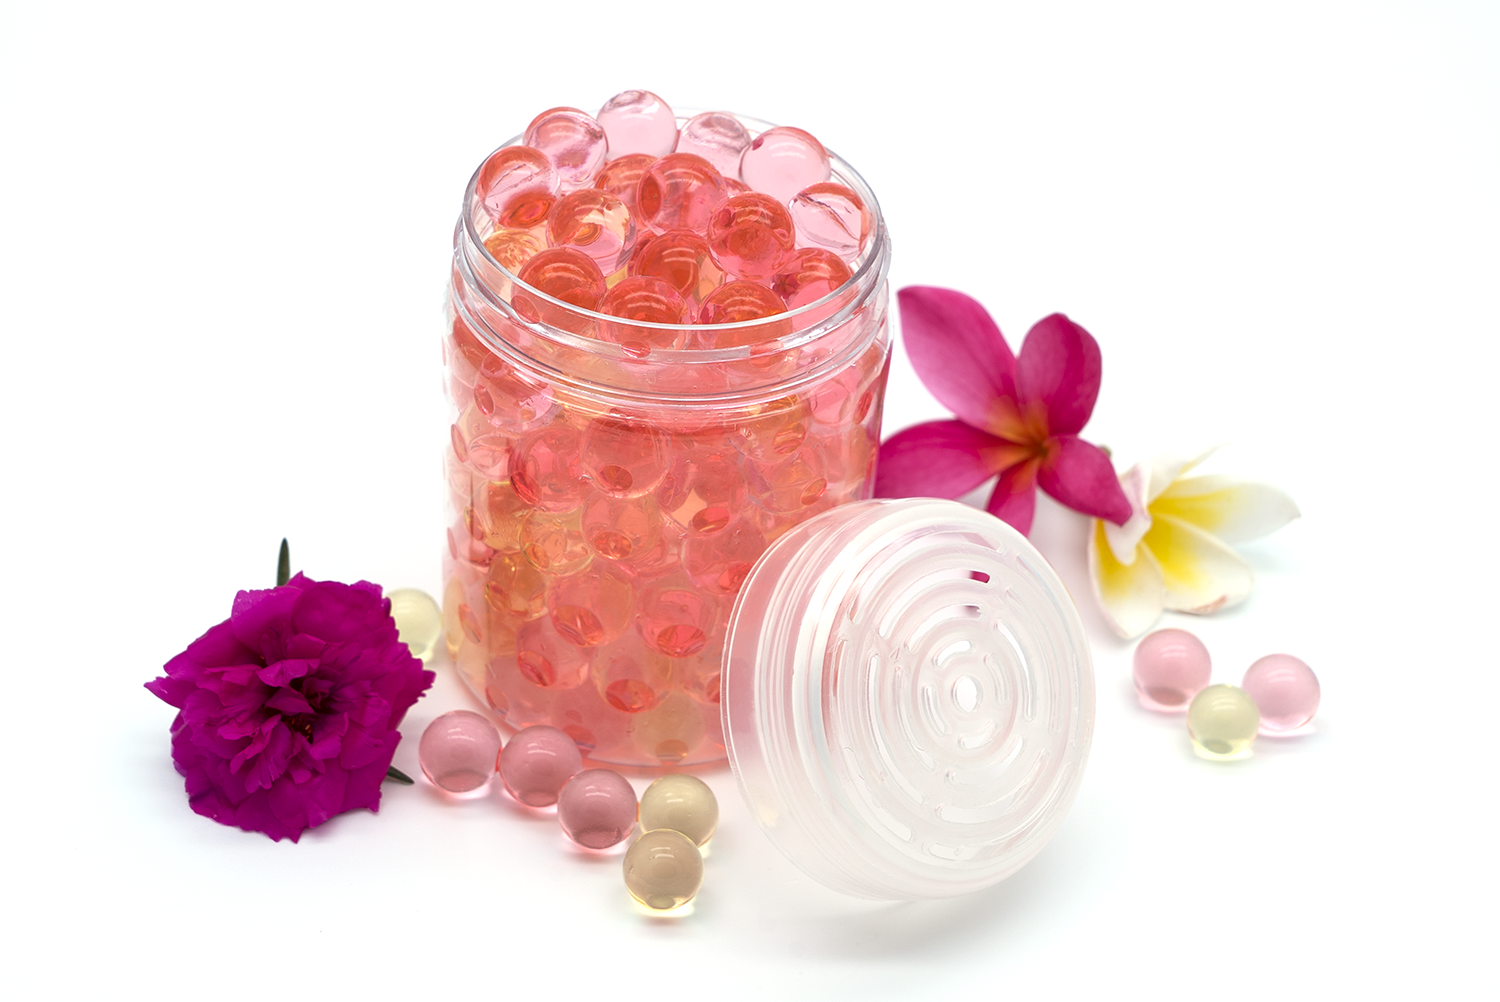 Demi aroma fragrance beads to ensure the best possible food